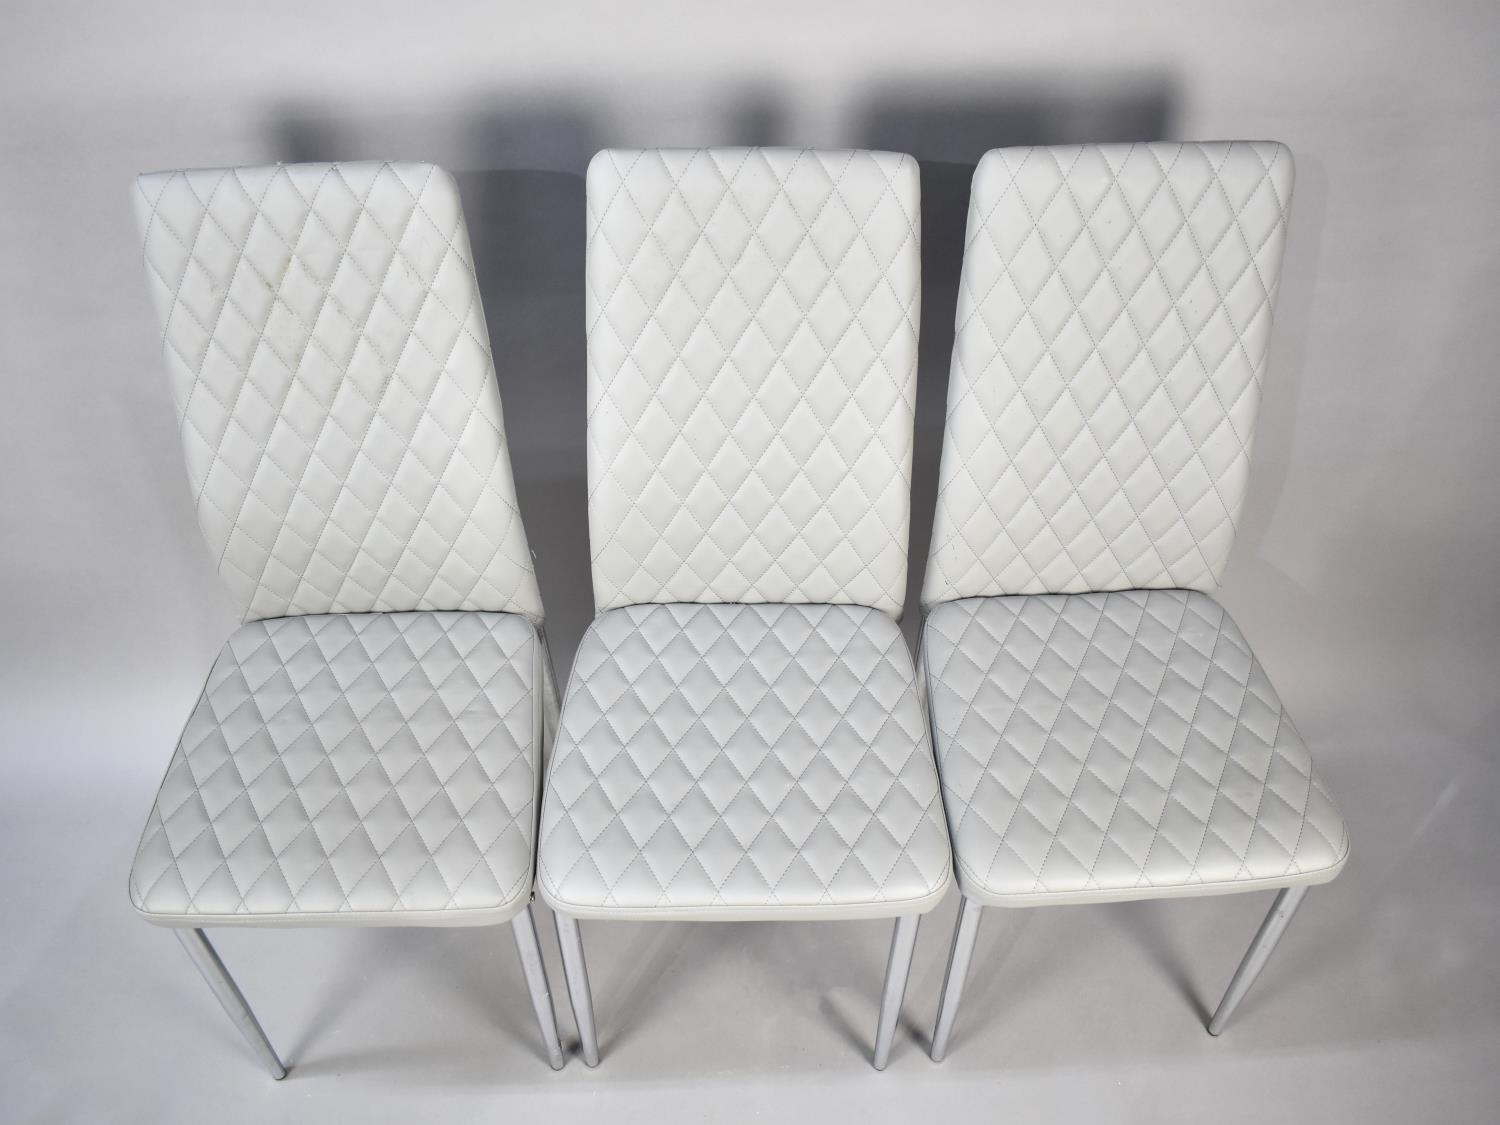 A Set of Five Modern Upholstered Chrome Based Dining Chairs - Image 3 of 3